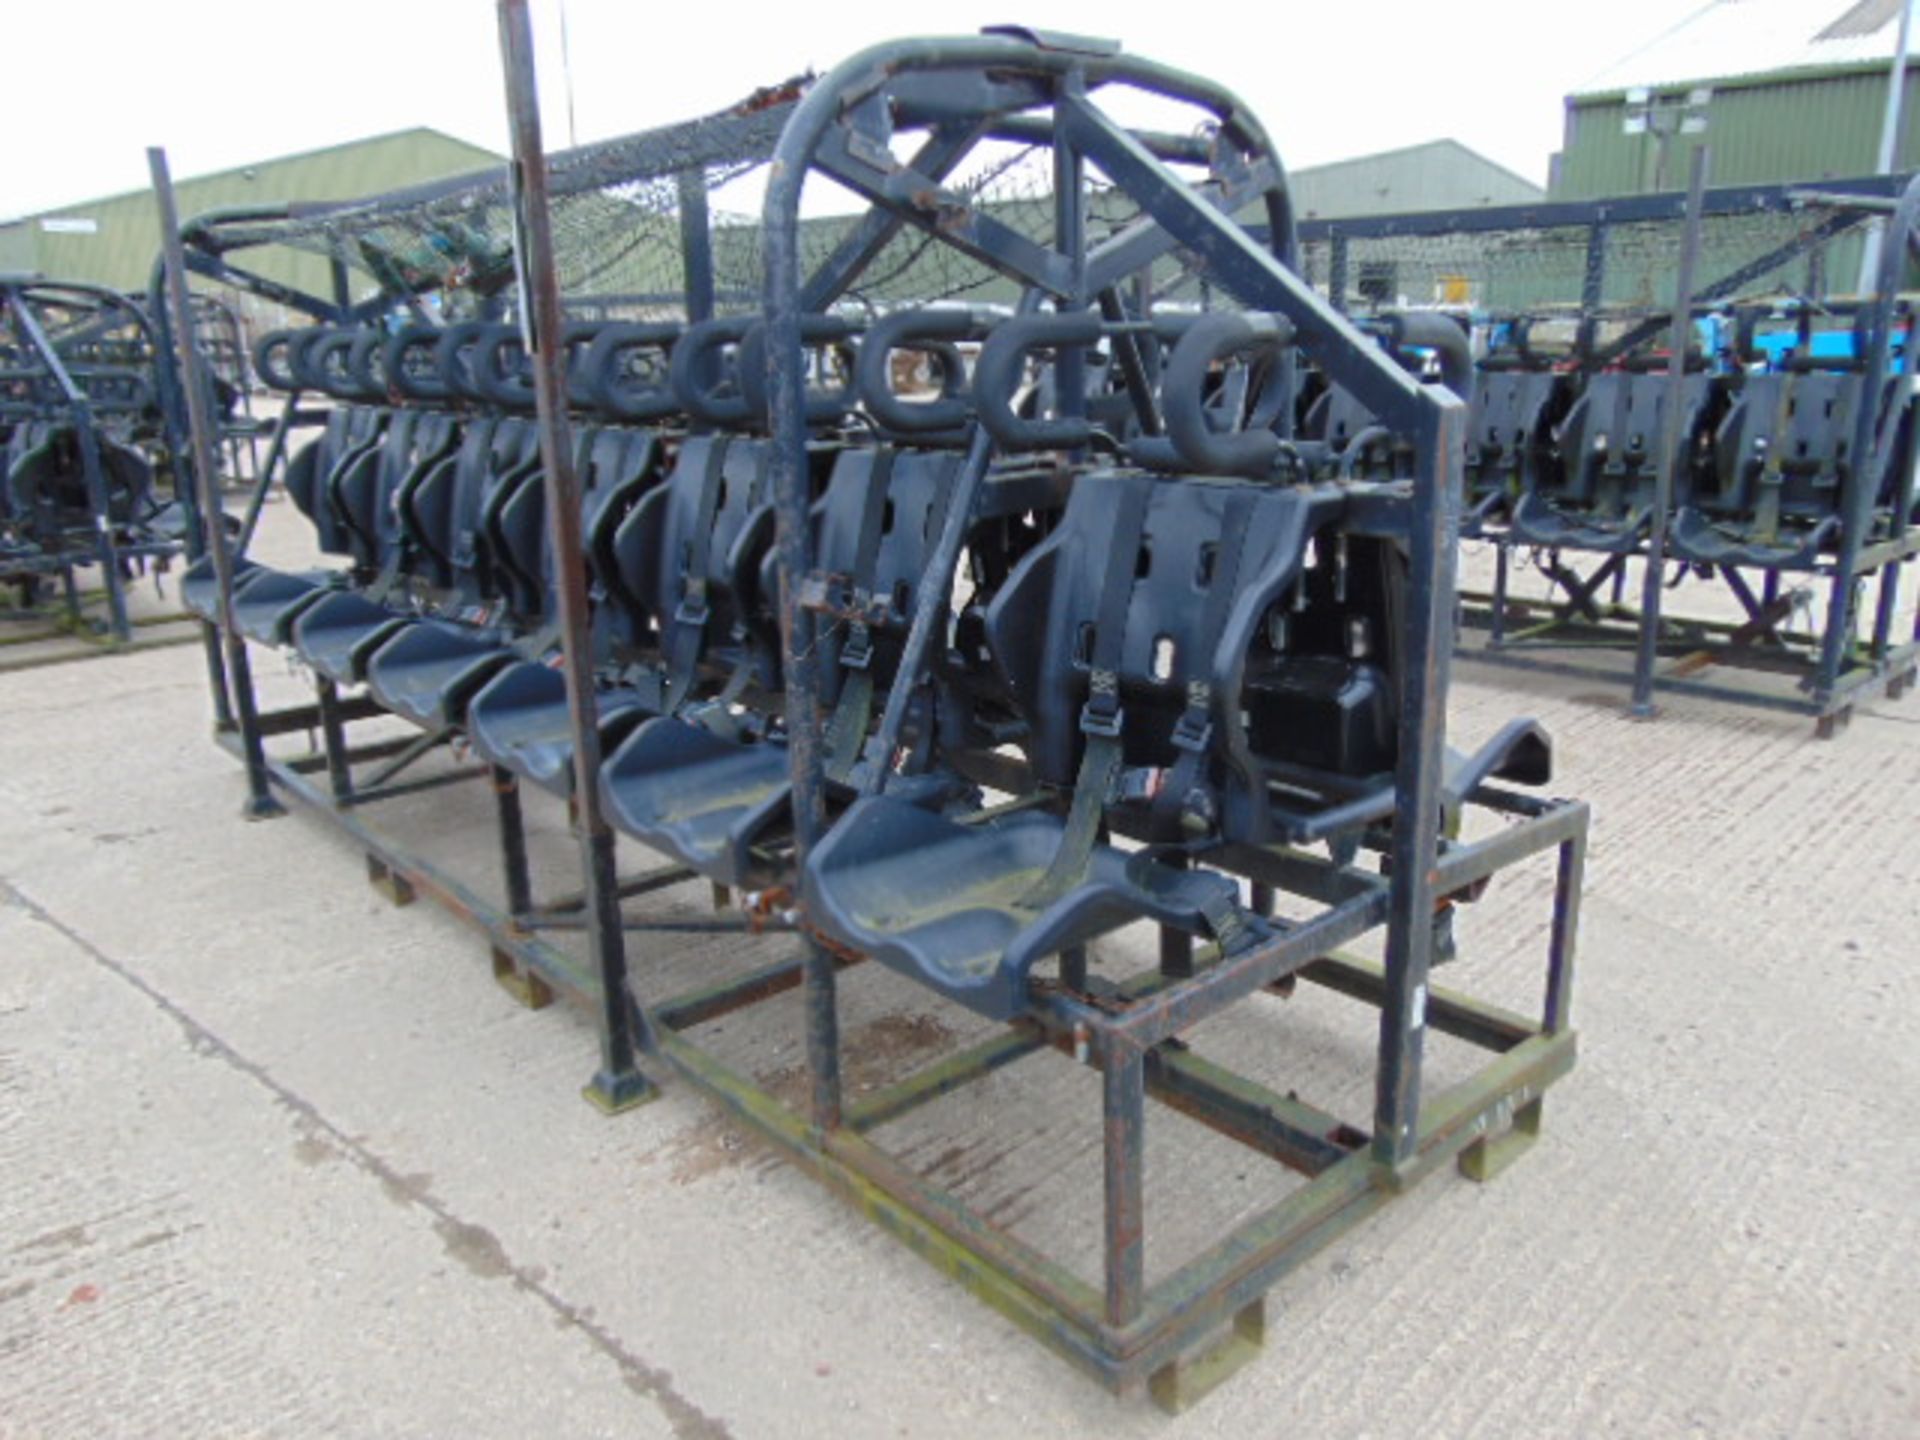 14 Man ROPS Security Seat suitable for Leyland Dafs, Bedfords etc - Image 5 of 6